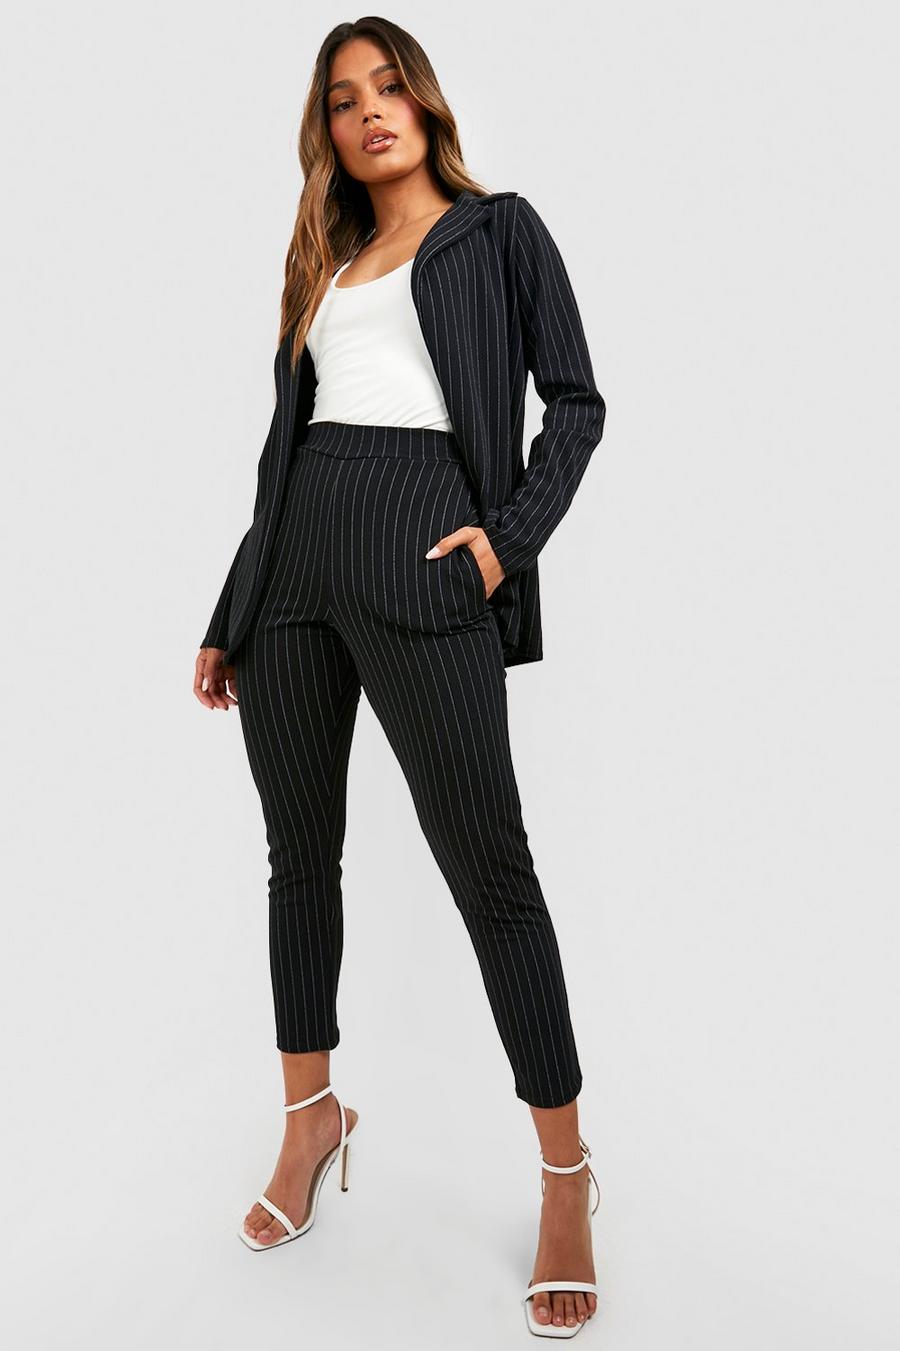 Black Pinstripe Tailored Blazer And Pants Co-Ord Suit